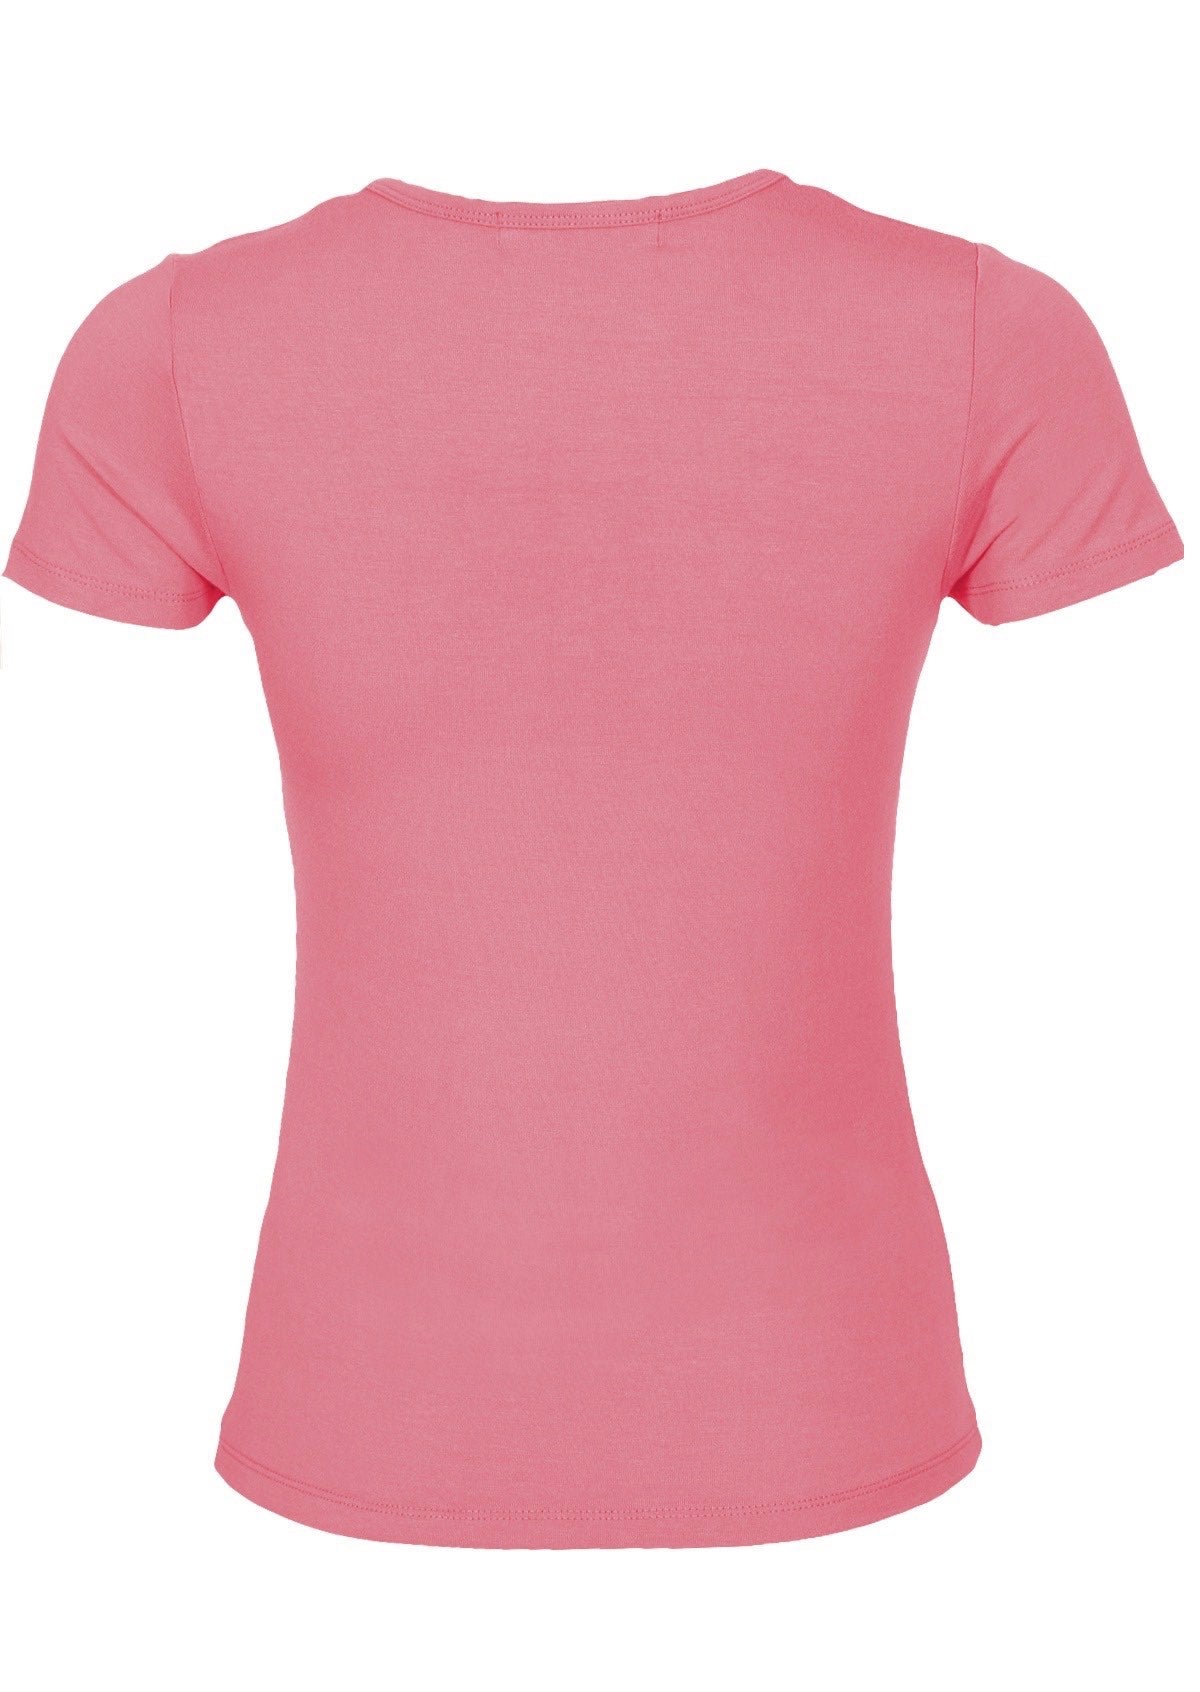 Back view women's scoop neck pink rayon fitted t-shirt.